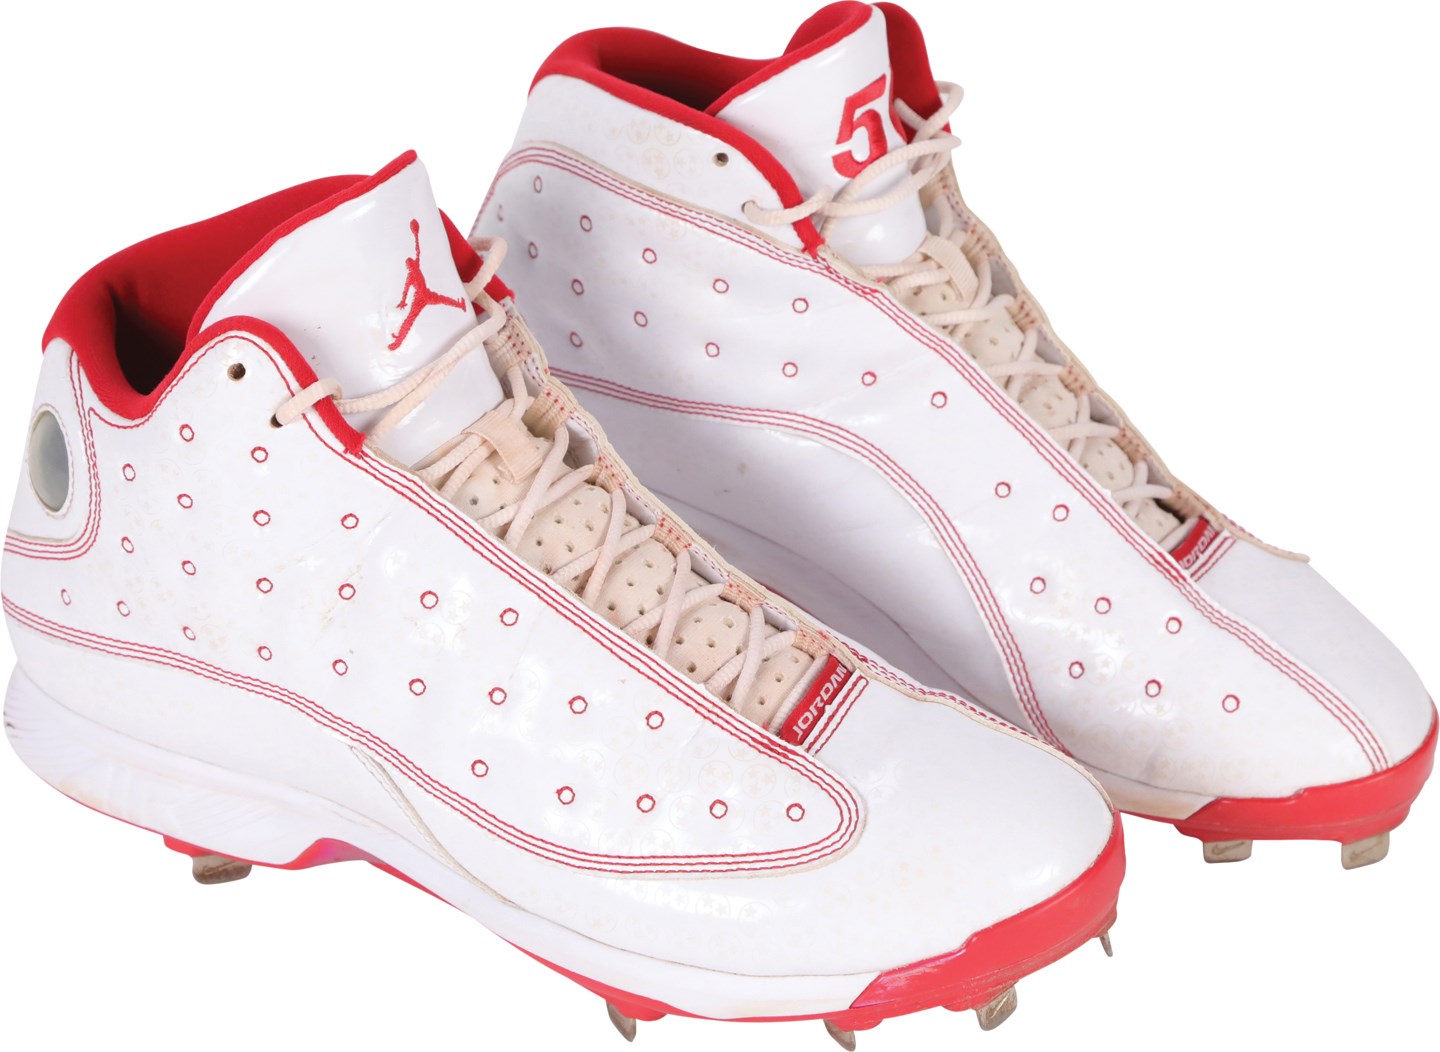 - 2019 Mookie Betts Air Jordan 13s Boston Red Sox Game Used Cleats - Photo-Matched to SEVEN Games inc. London Series & Two Home Runs (Betts LOA & Fanatics)